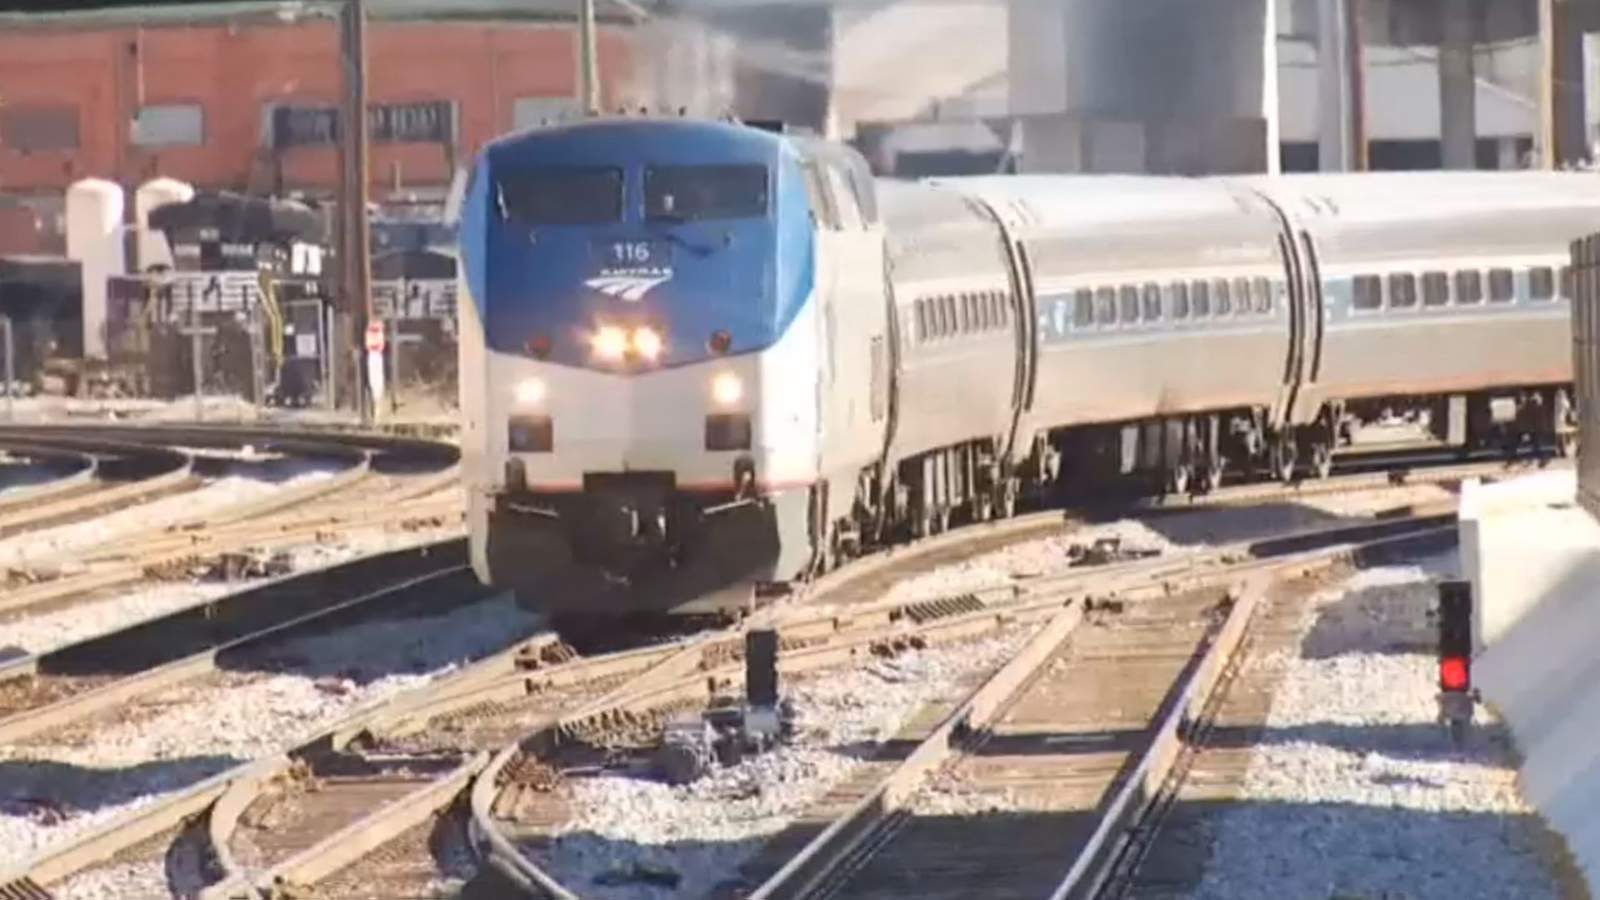 Amtrak to start requiring face coverings on trains, in stations